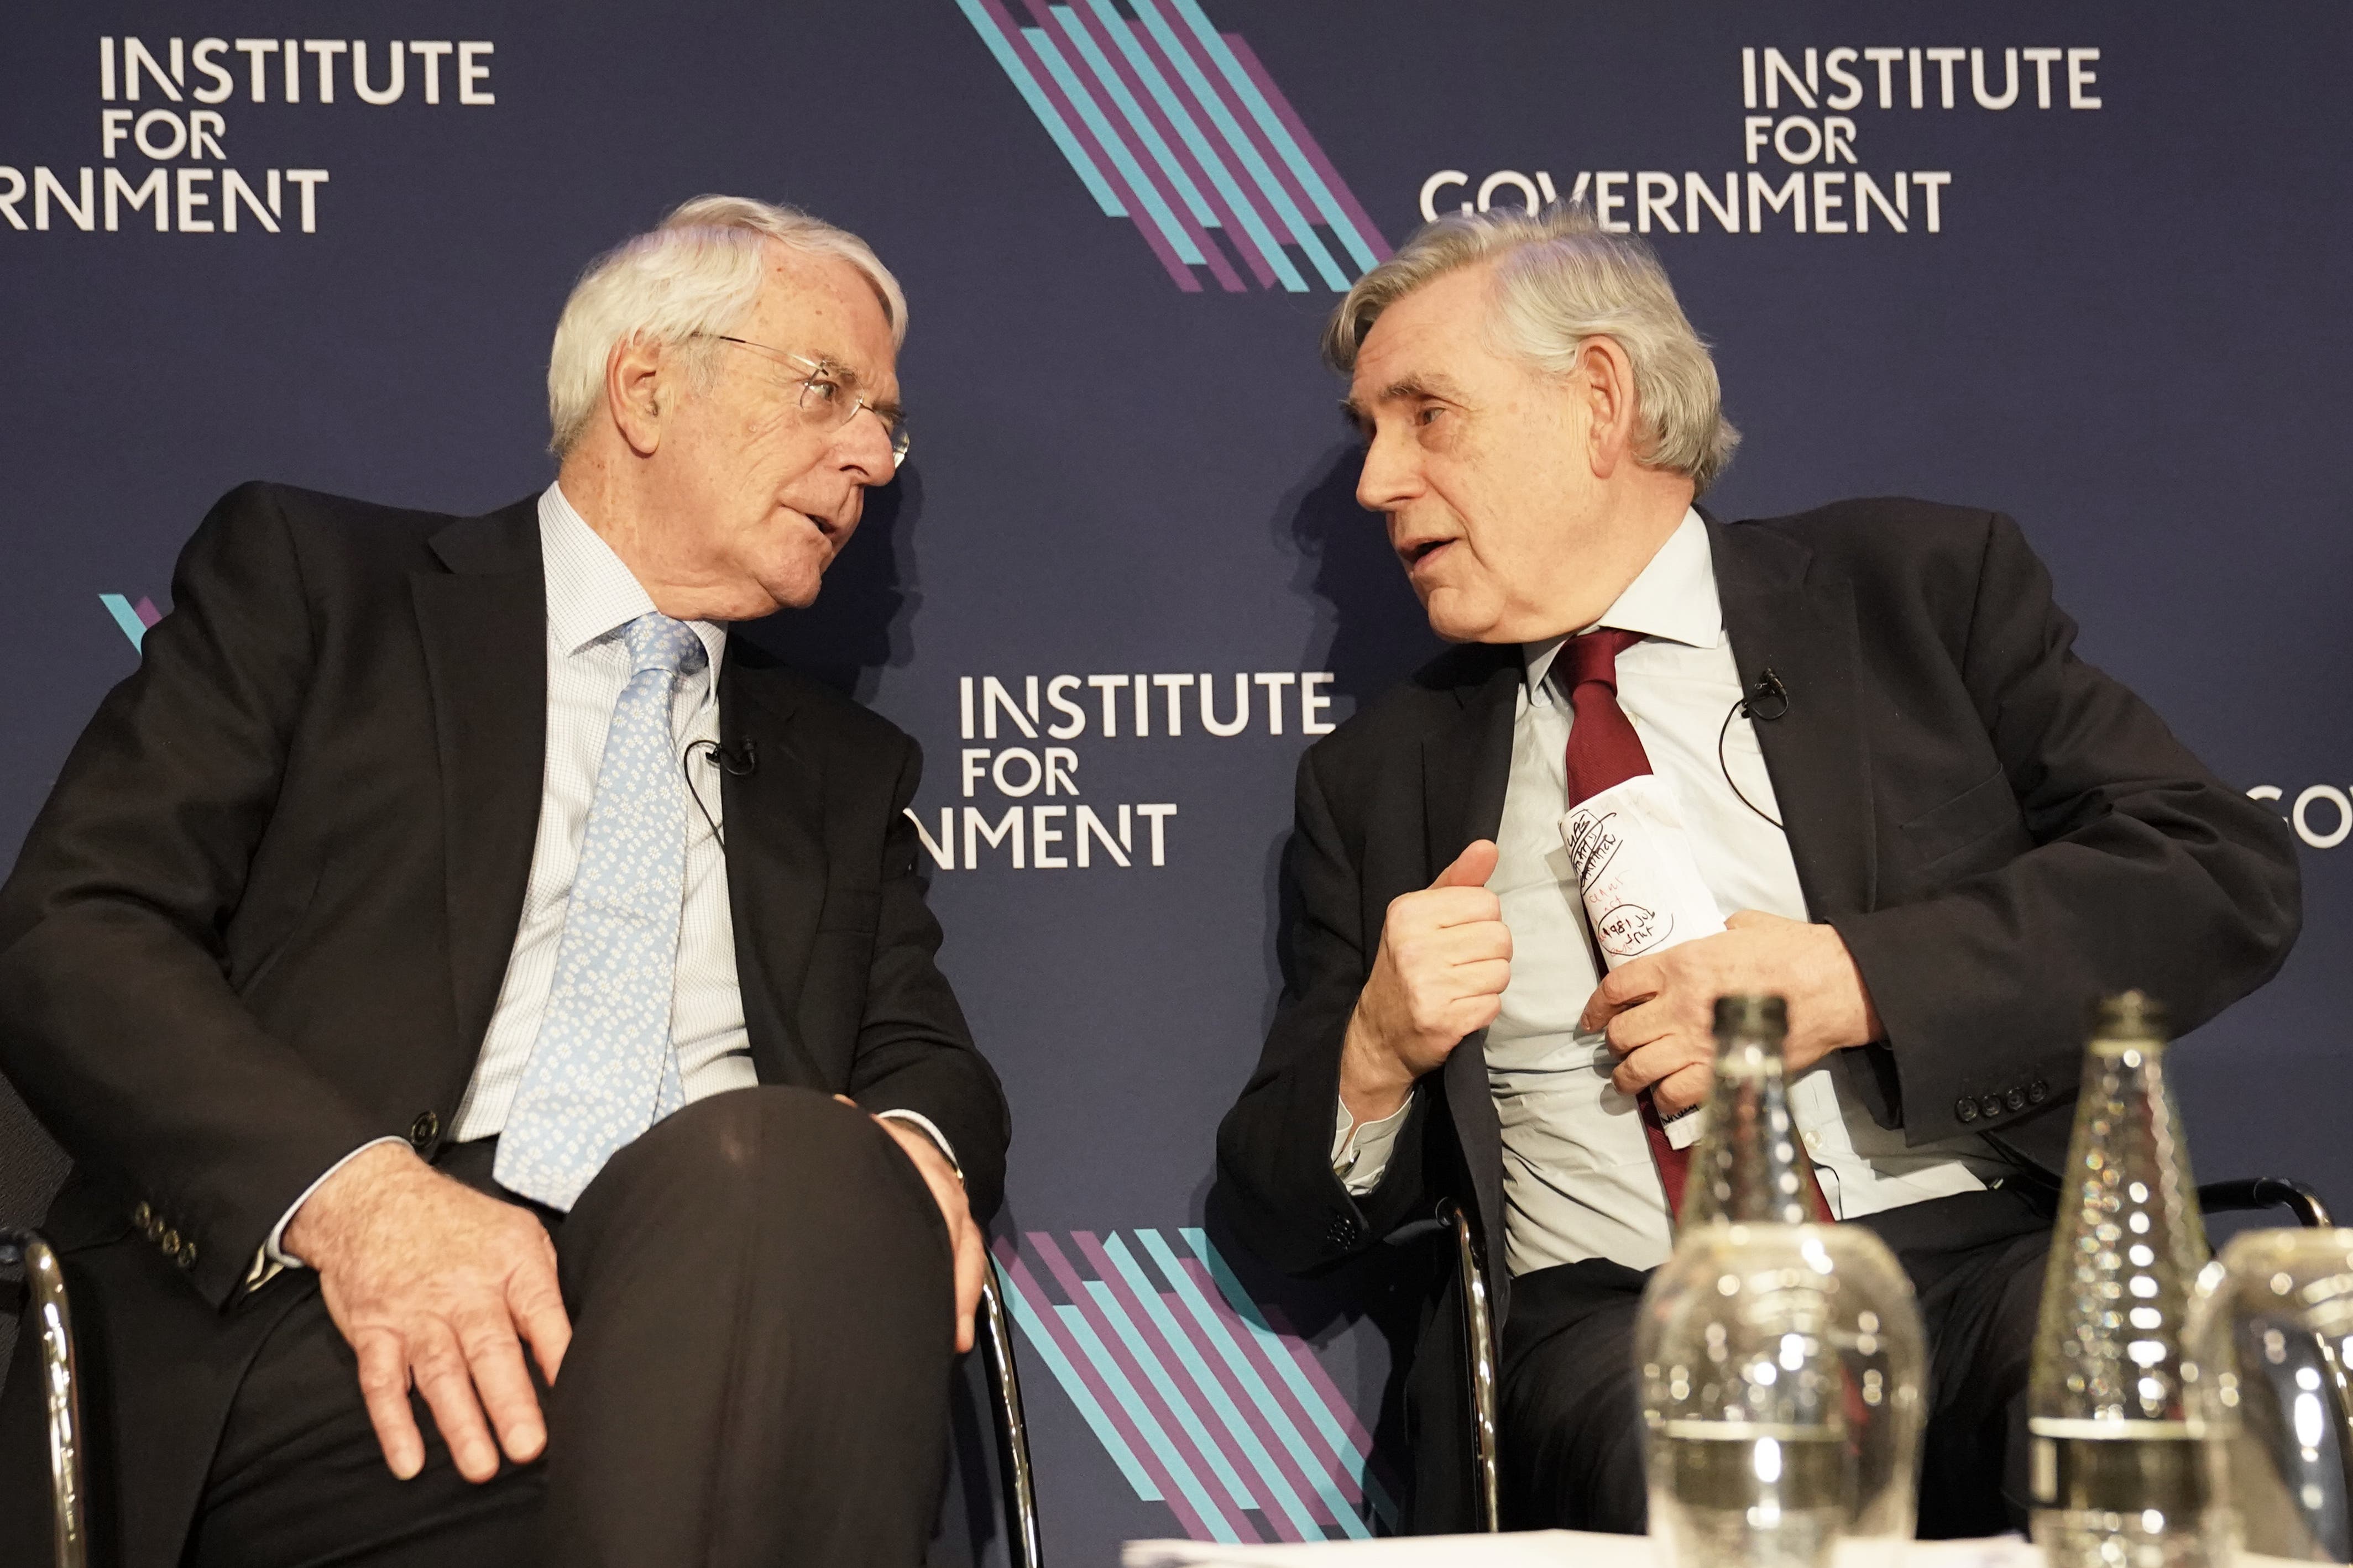 Former prime ministers John Major and Gordon Brown at the launch of the final report of the Institute for Government’s year-long Commission on the Centre of Government